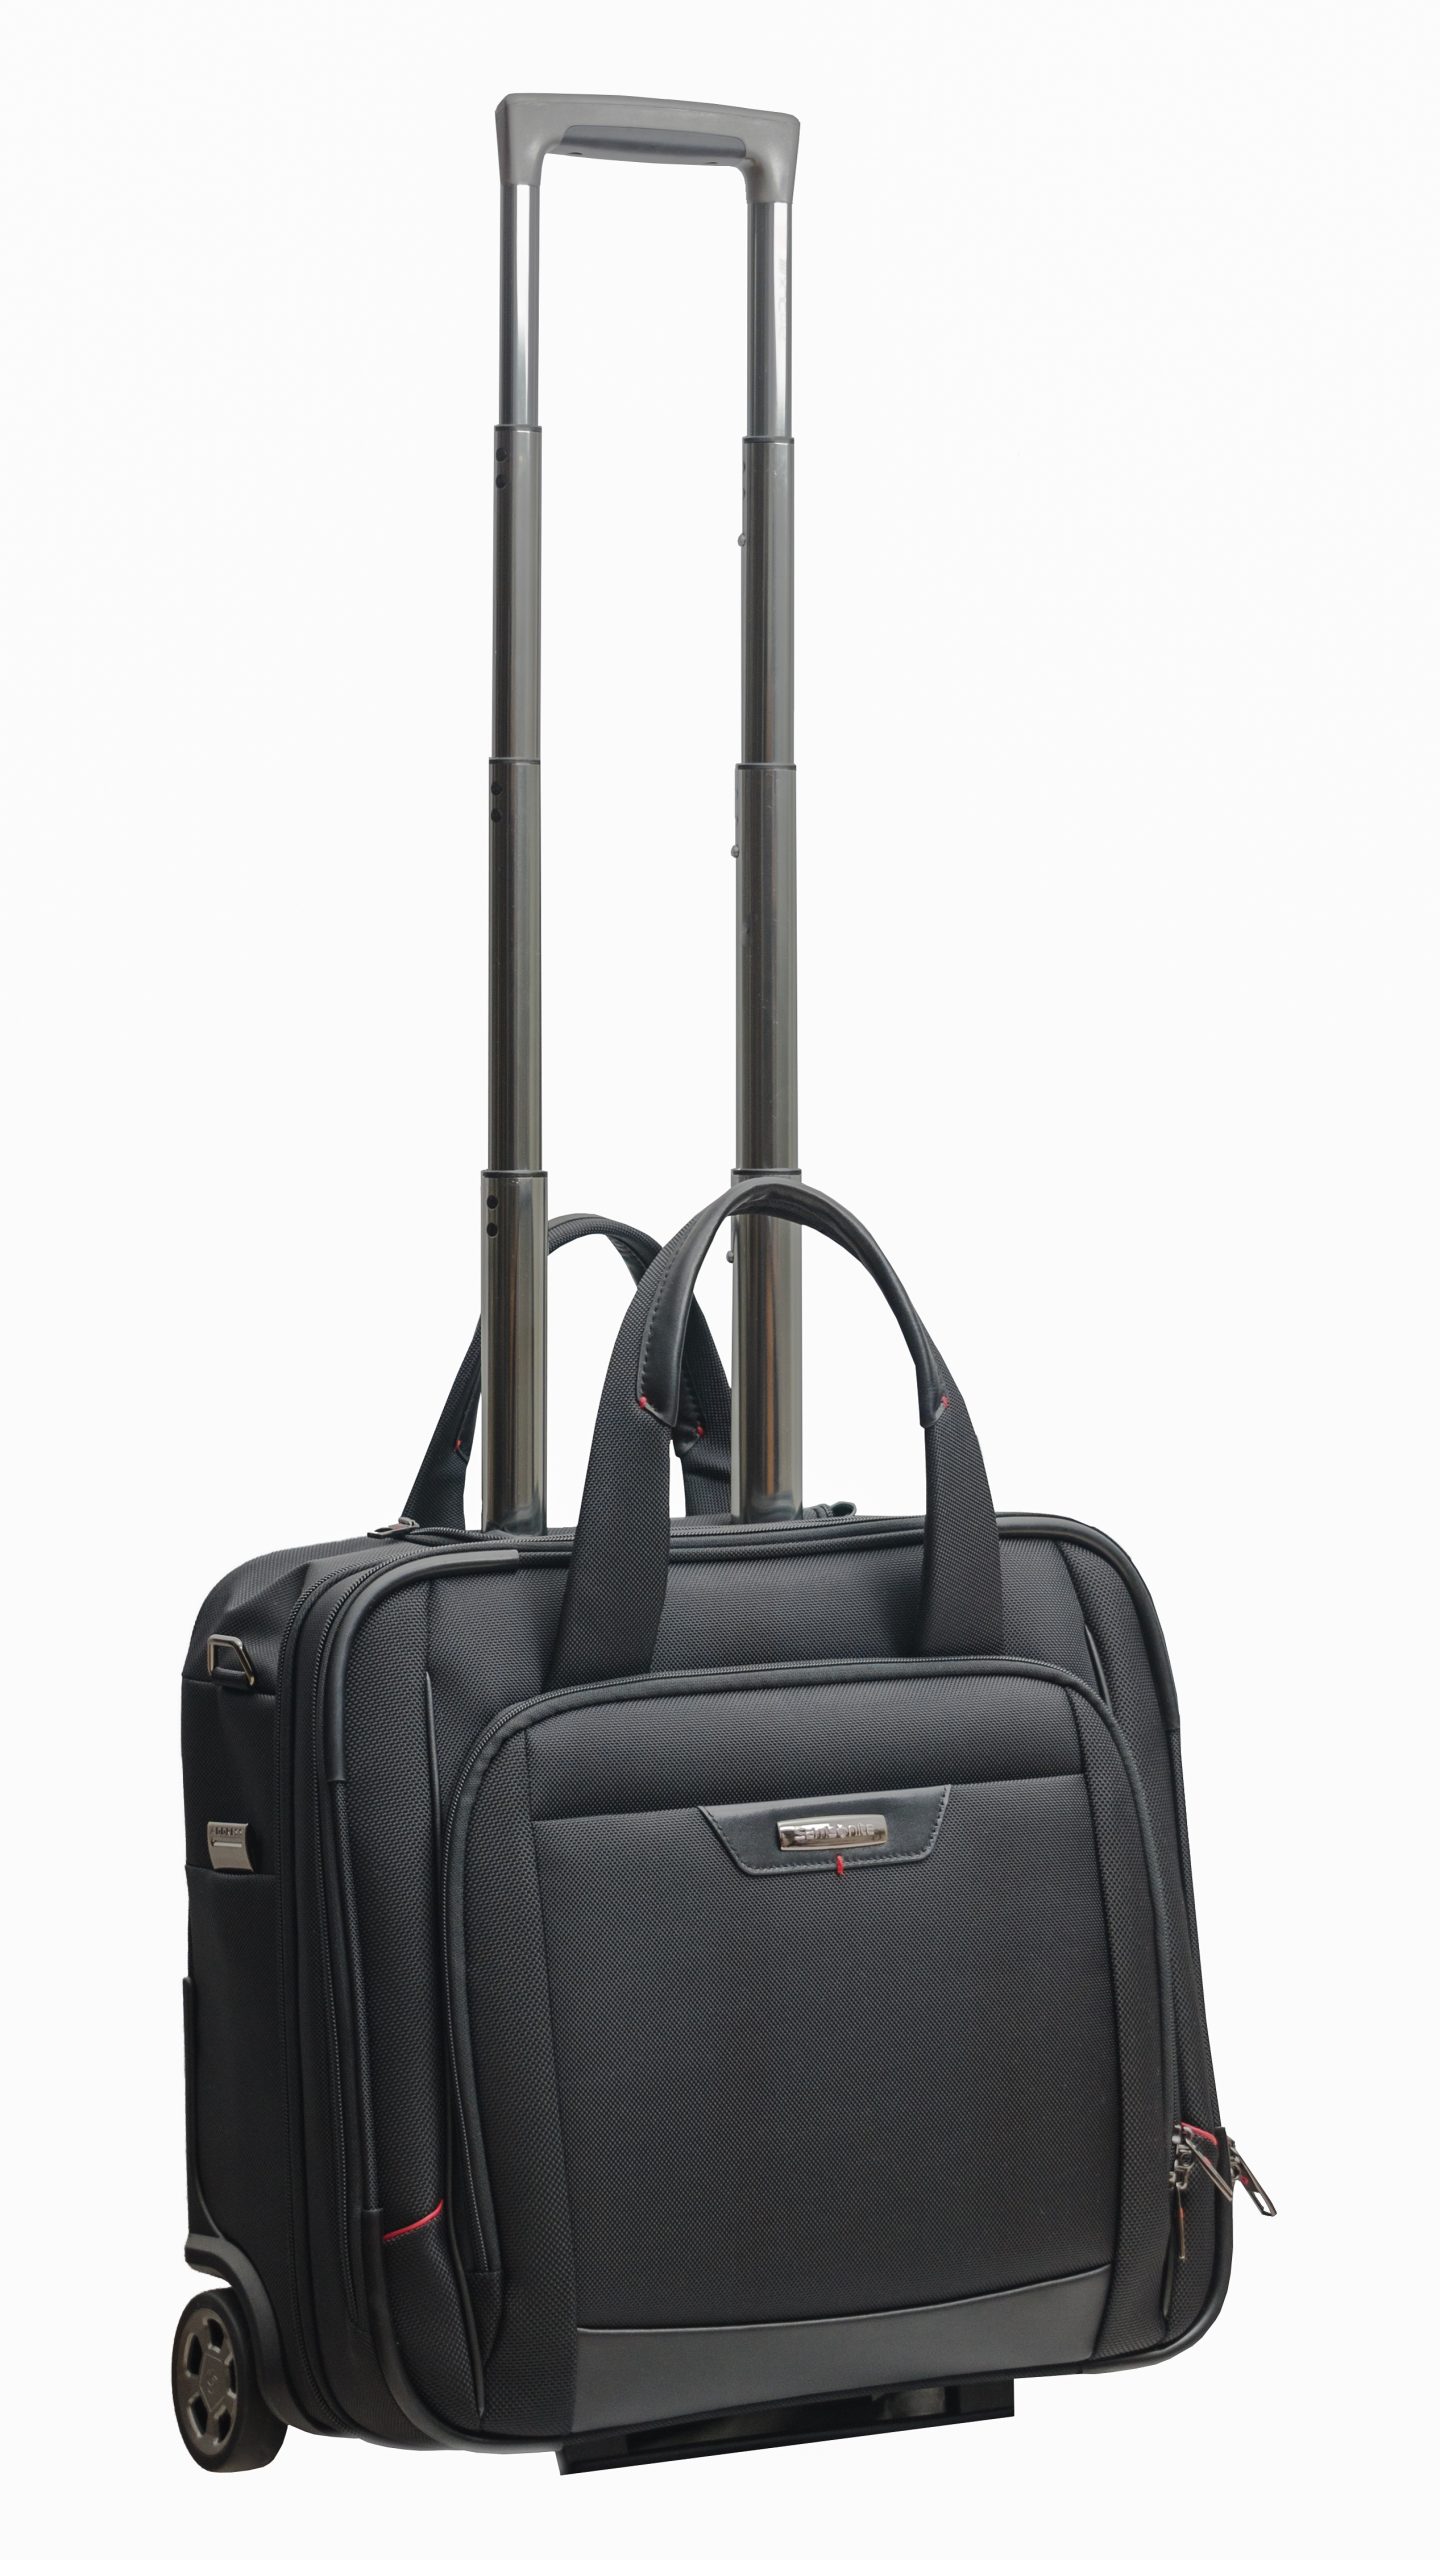 Top 10 Best Travel Luggage for Seniors: Lightweight and Durable Options